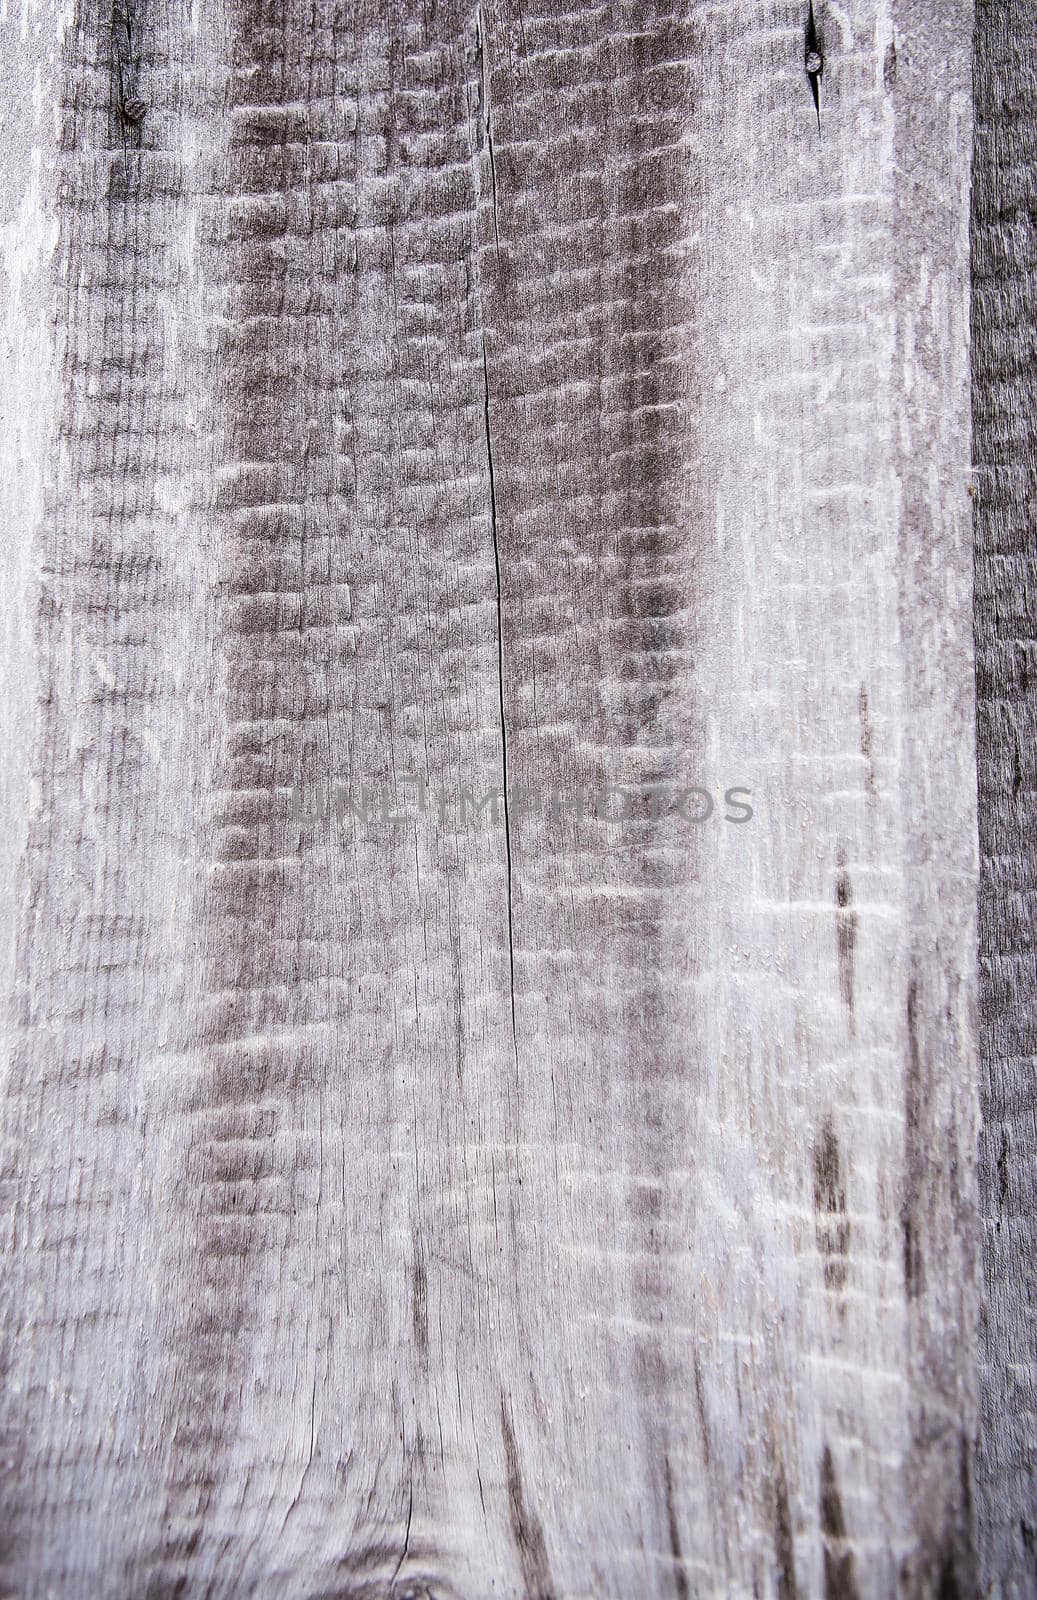 Very old wooden texture, carpentry close-up background